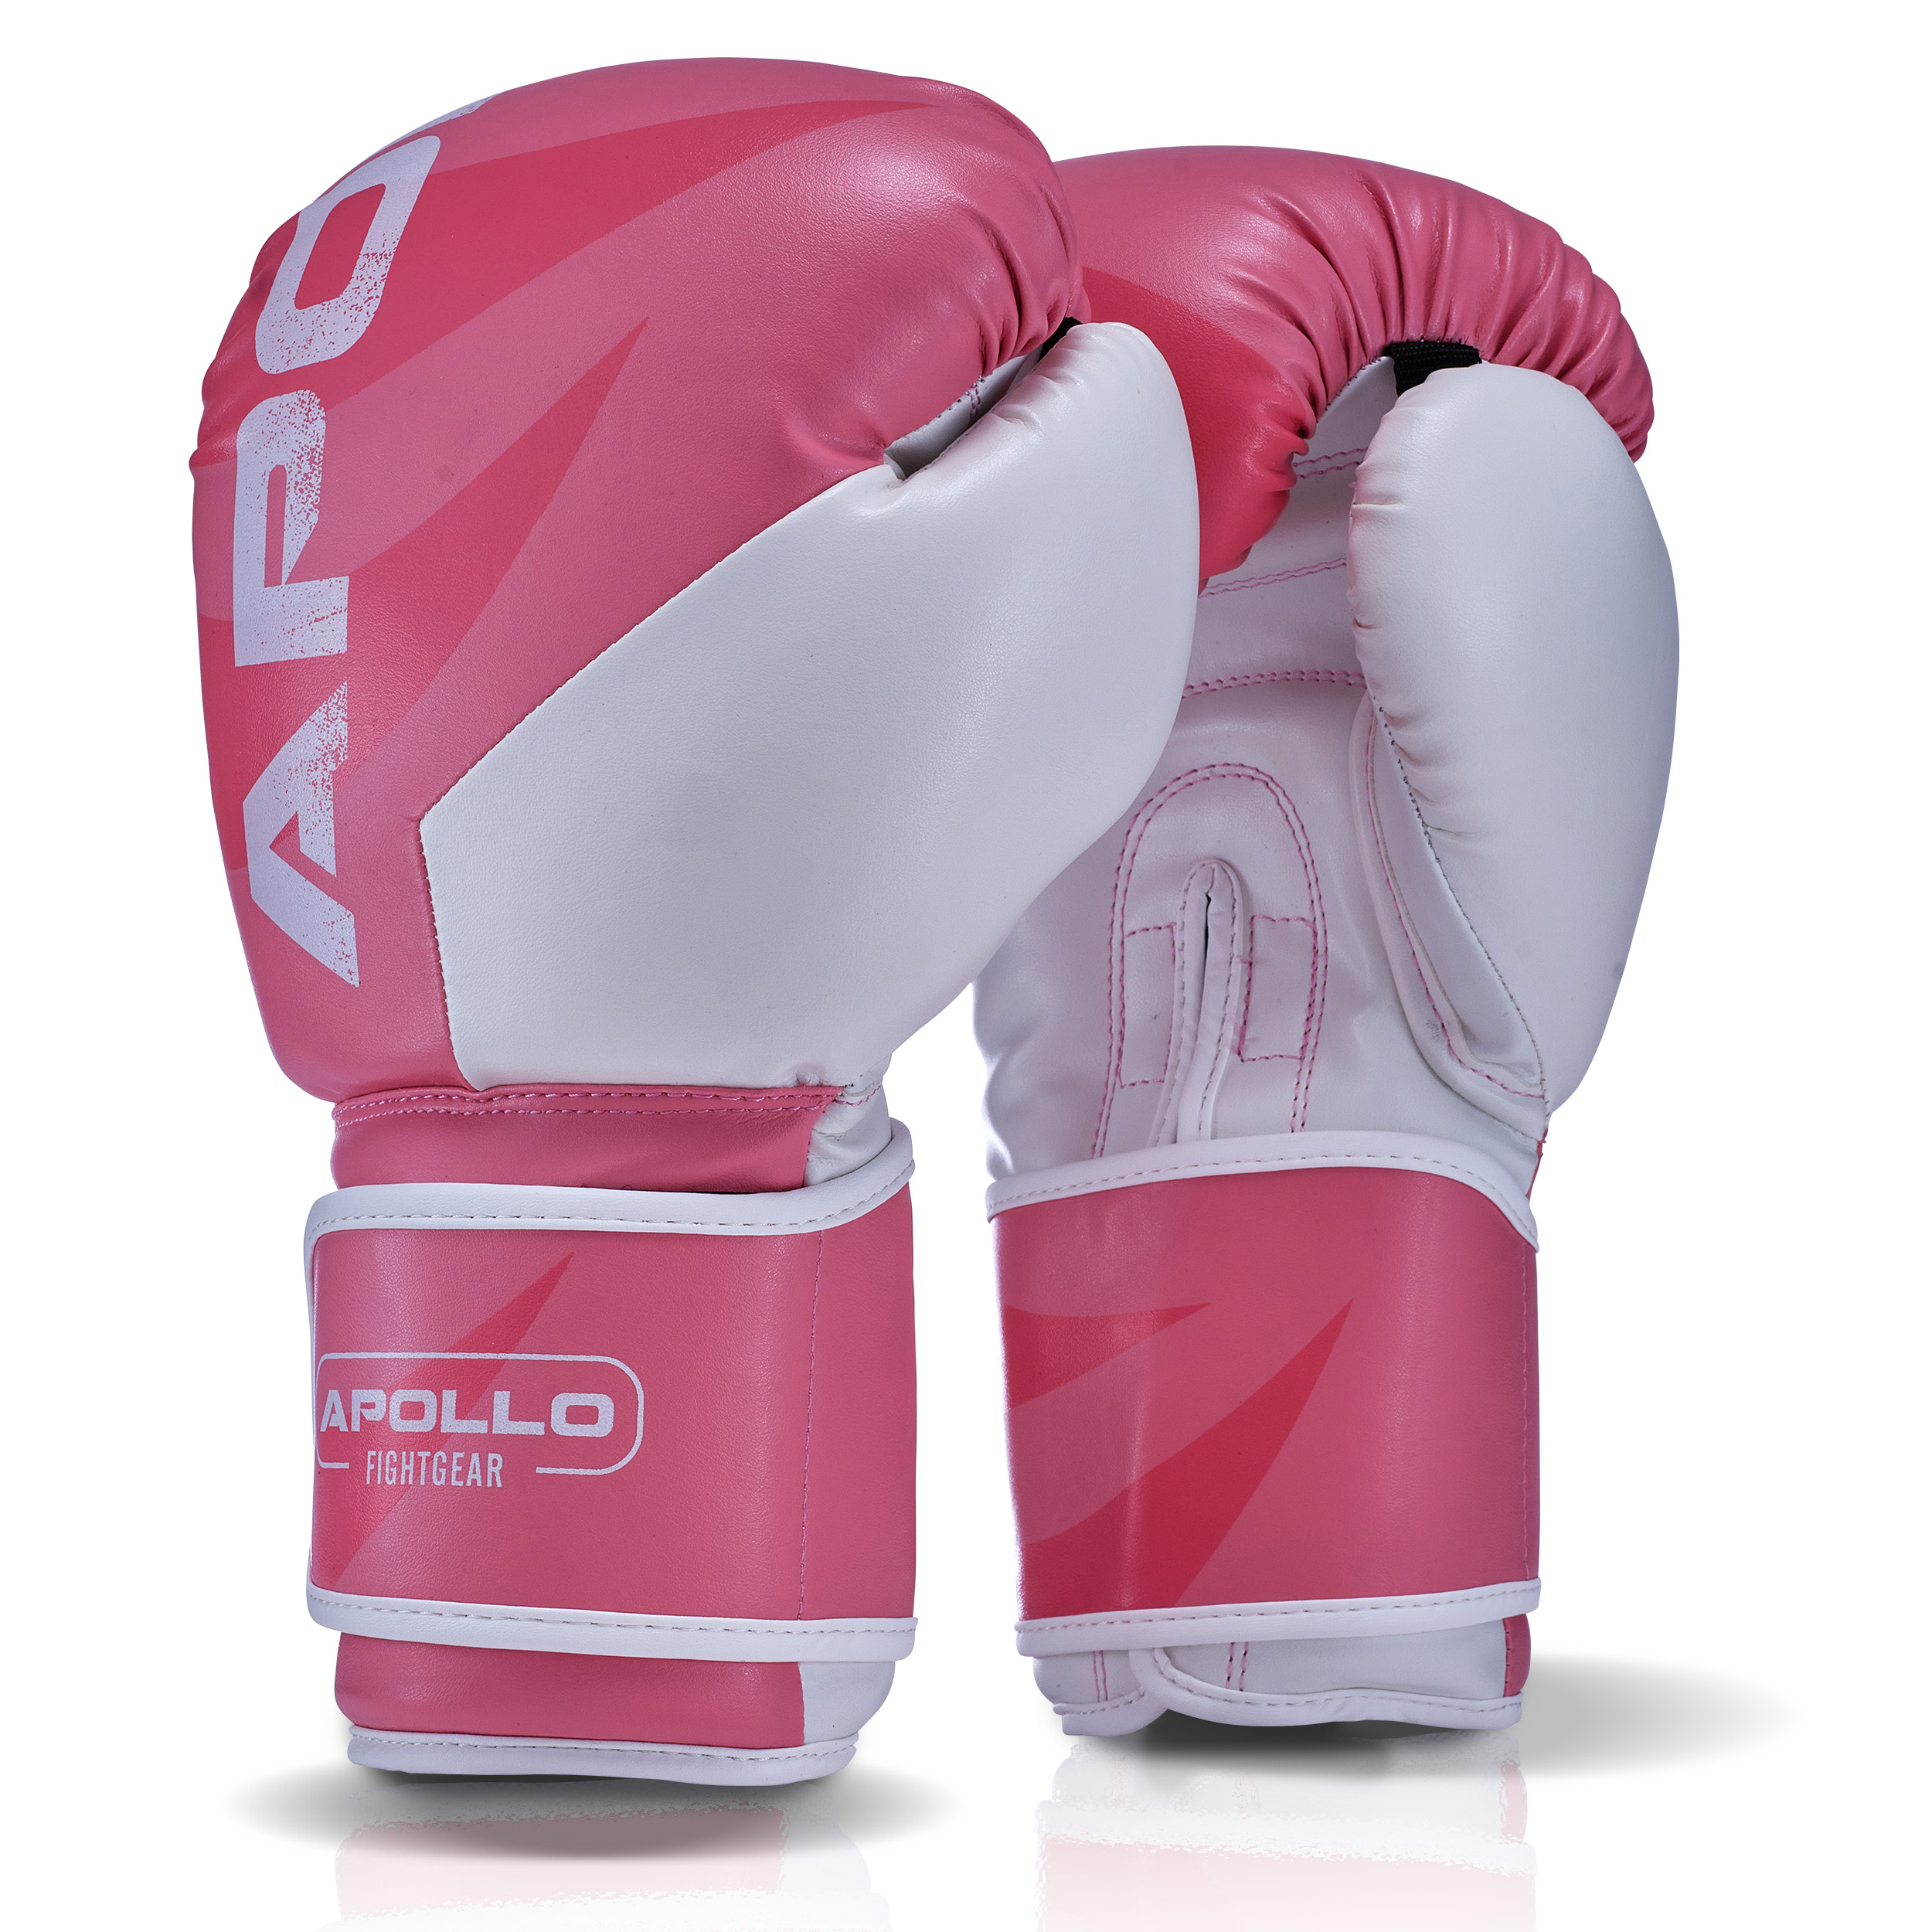 Apollo Boxhandschuh Champion Pink Weiss 12oz